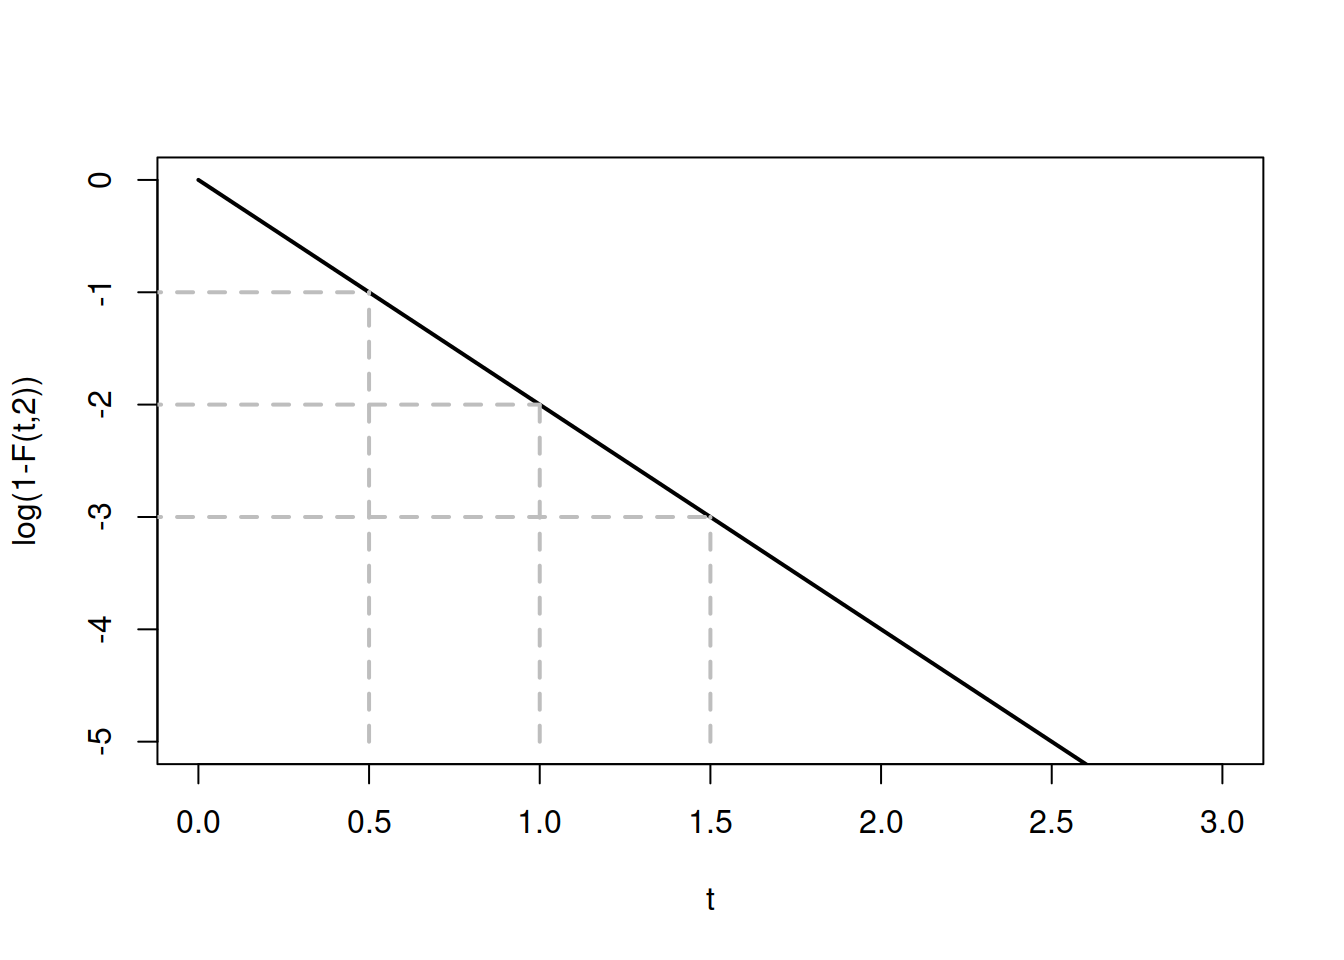 Memoryless property of Exponential distibution with $\lambda=2$.